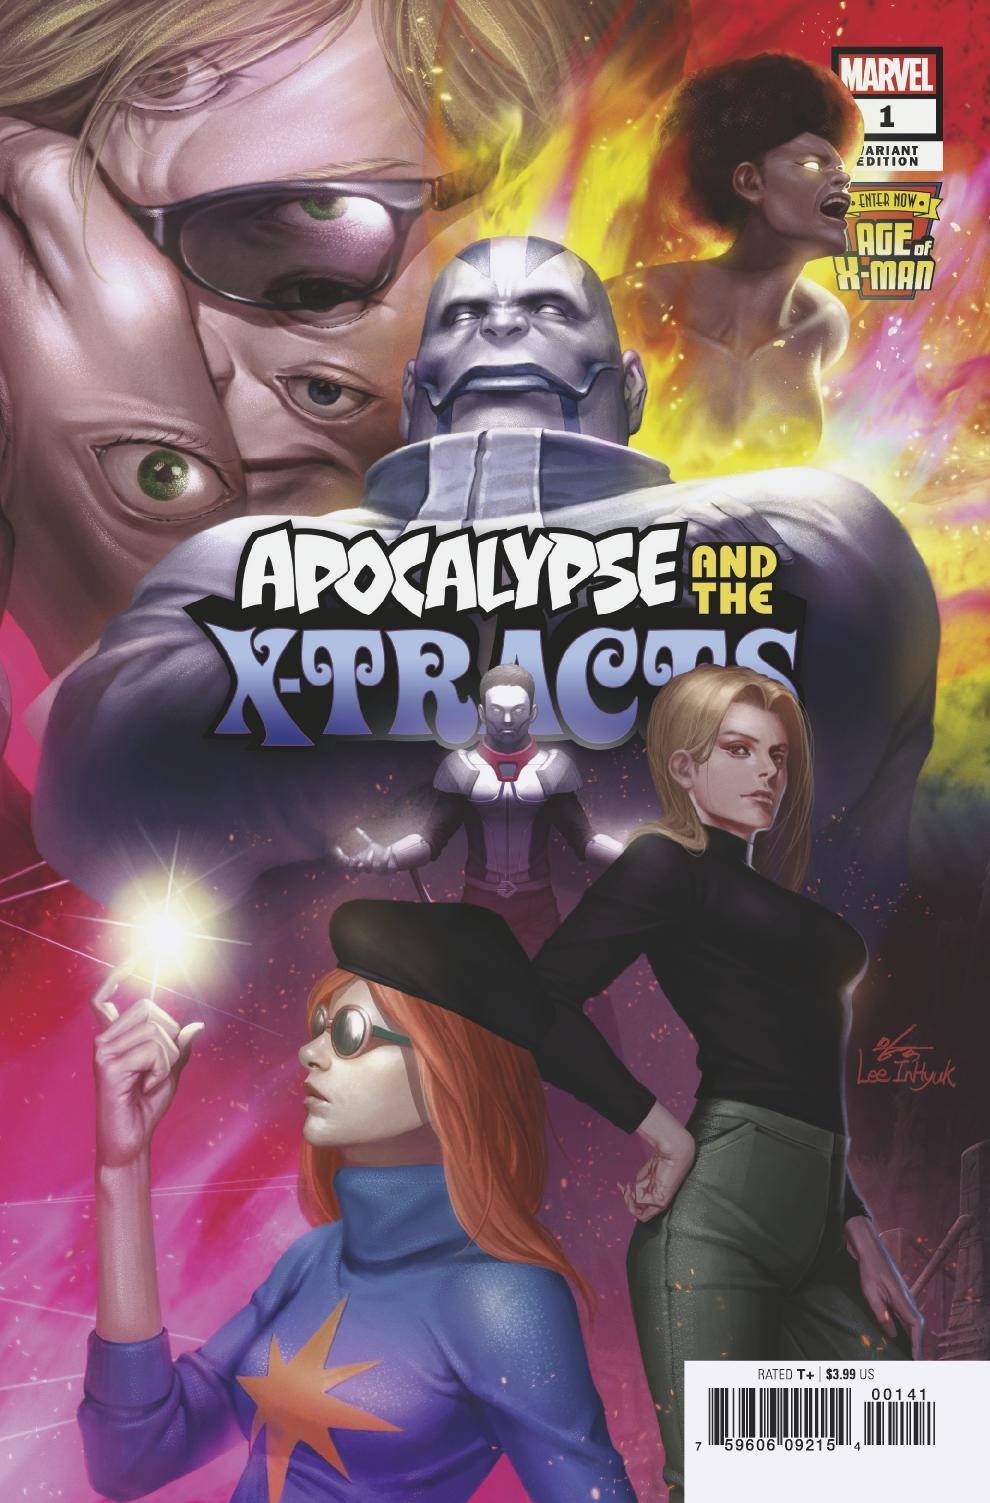 AGE OF X-MAN APOCALYPSE AND X-TRACTS #1 INHYUK LEE CONNECTING VARIANT (OF 5) 03/13/19